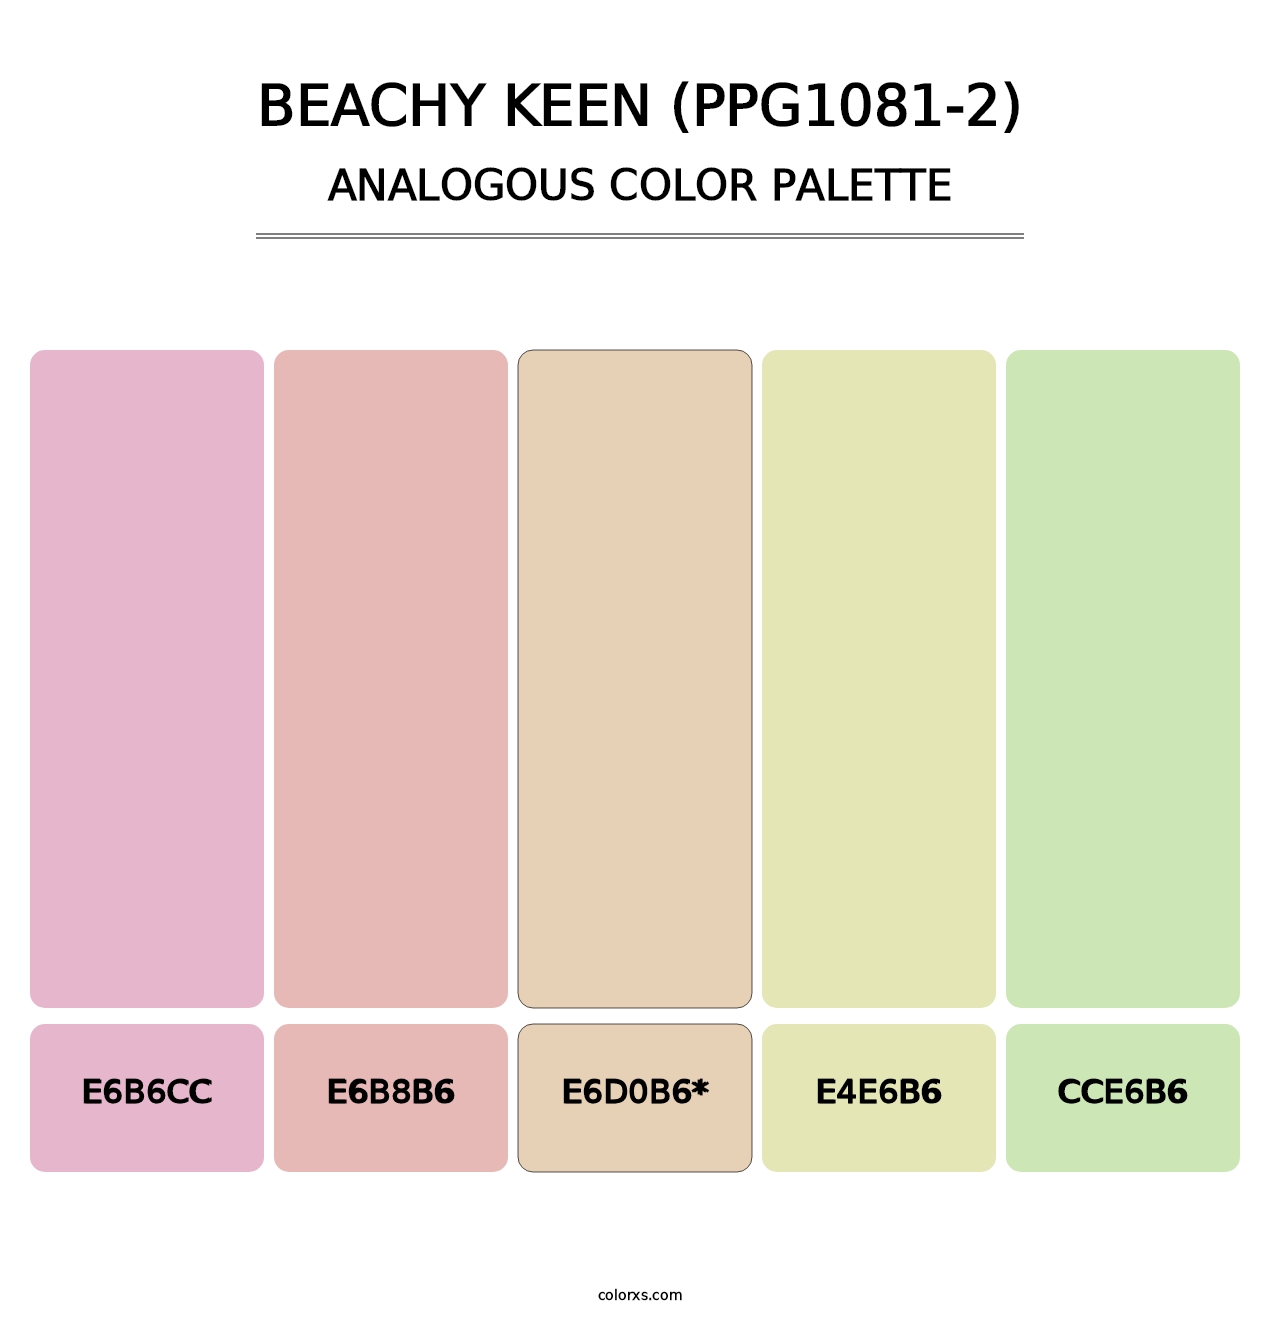 Beachy Keen (PPG1081-2) - Analogous Color Palette